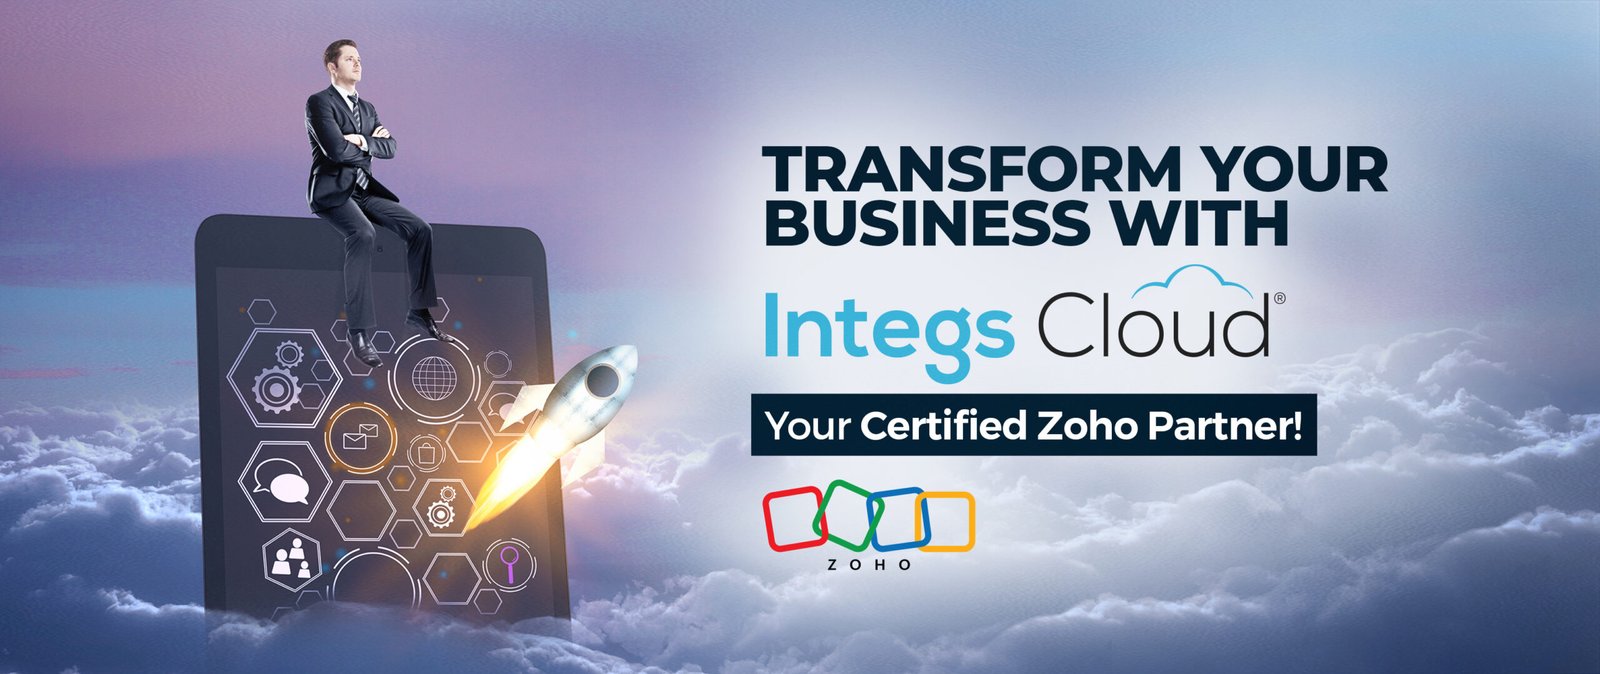 Transform-Your-Business-with-Integs-Cloud-banner